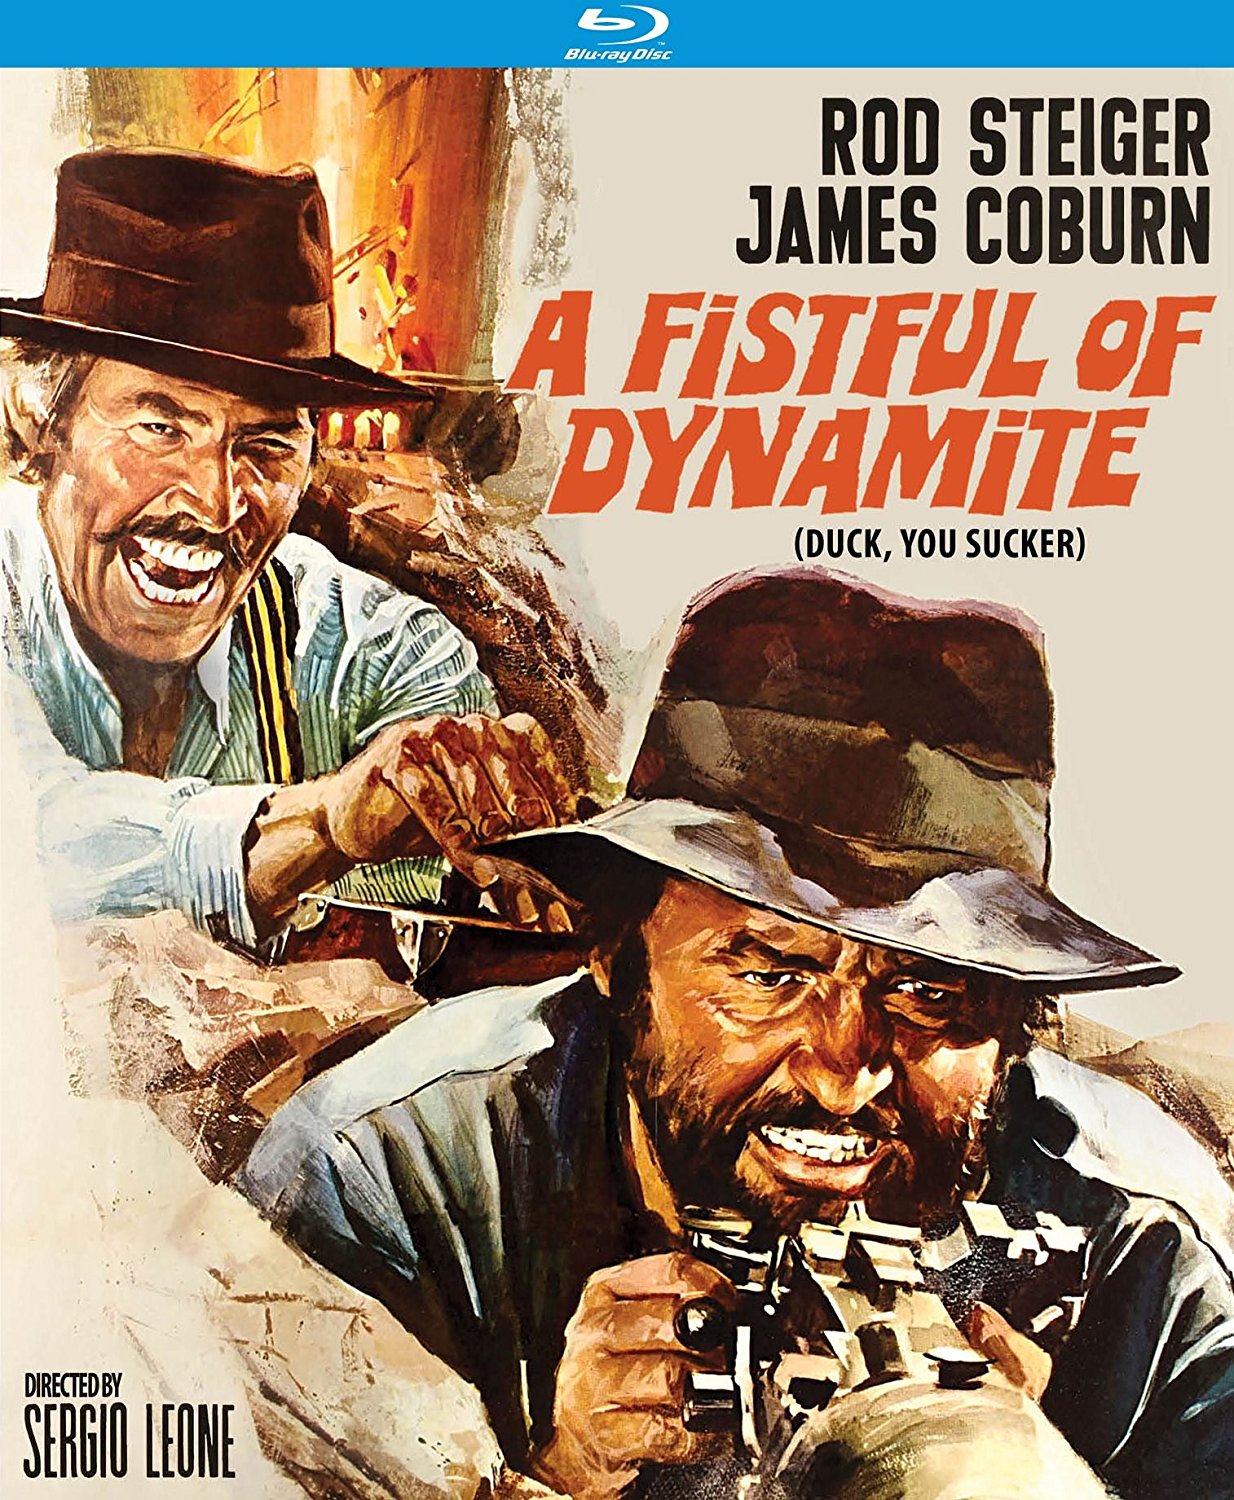 A fistful of dynamite James Coburn movie poster print